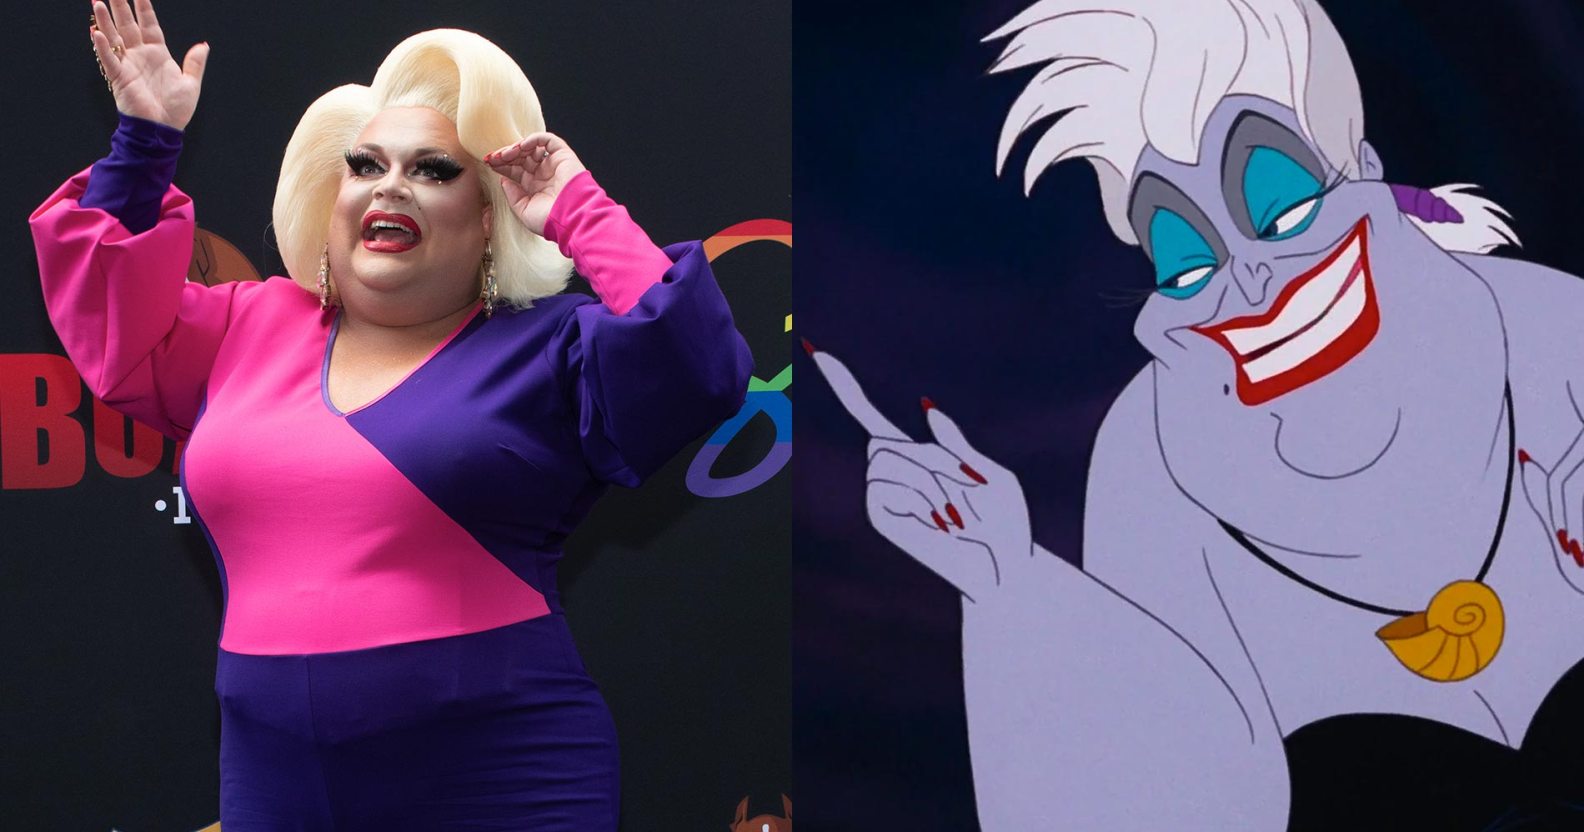 The Little Mermaid: 5 queer faves and drag queens who could play Ursula